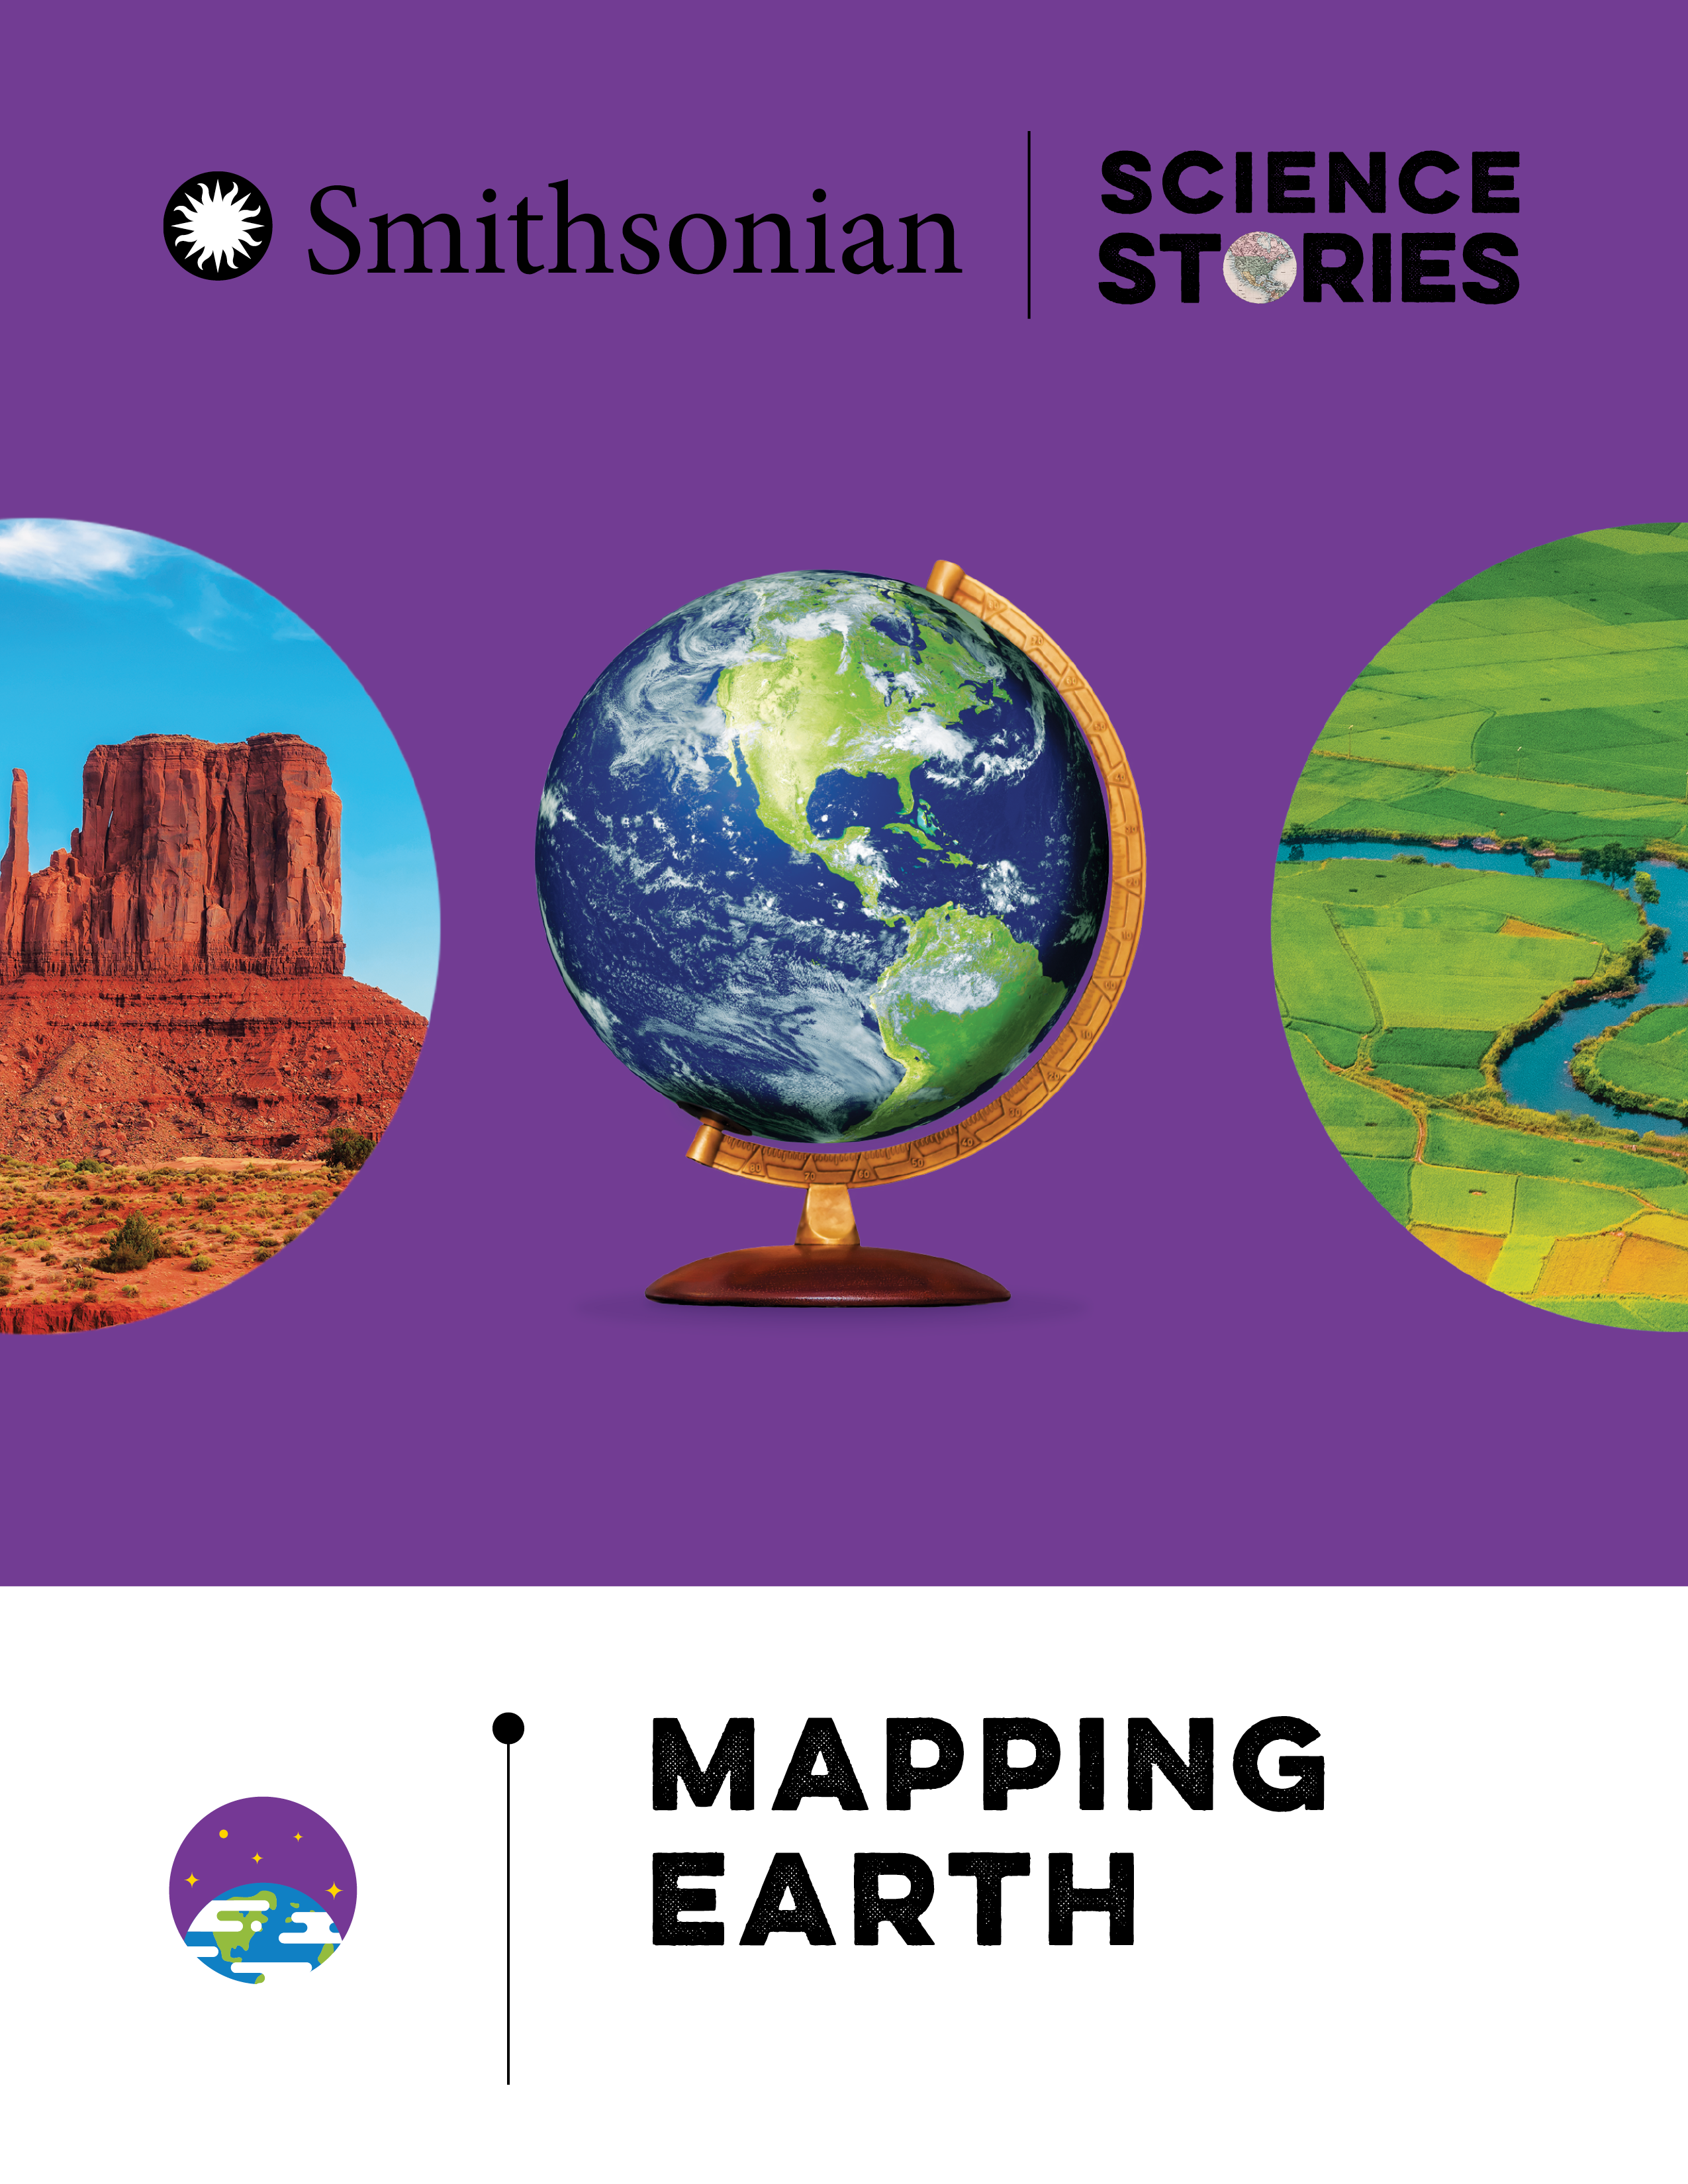 Mapping Earth book cover showing an orange-colored butte structure, a world globe, an overhead photo of a river flowing through farm fields.